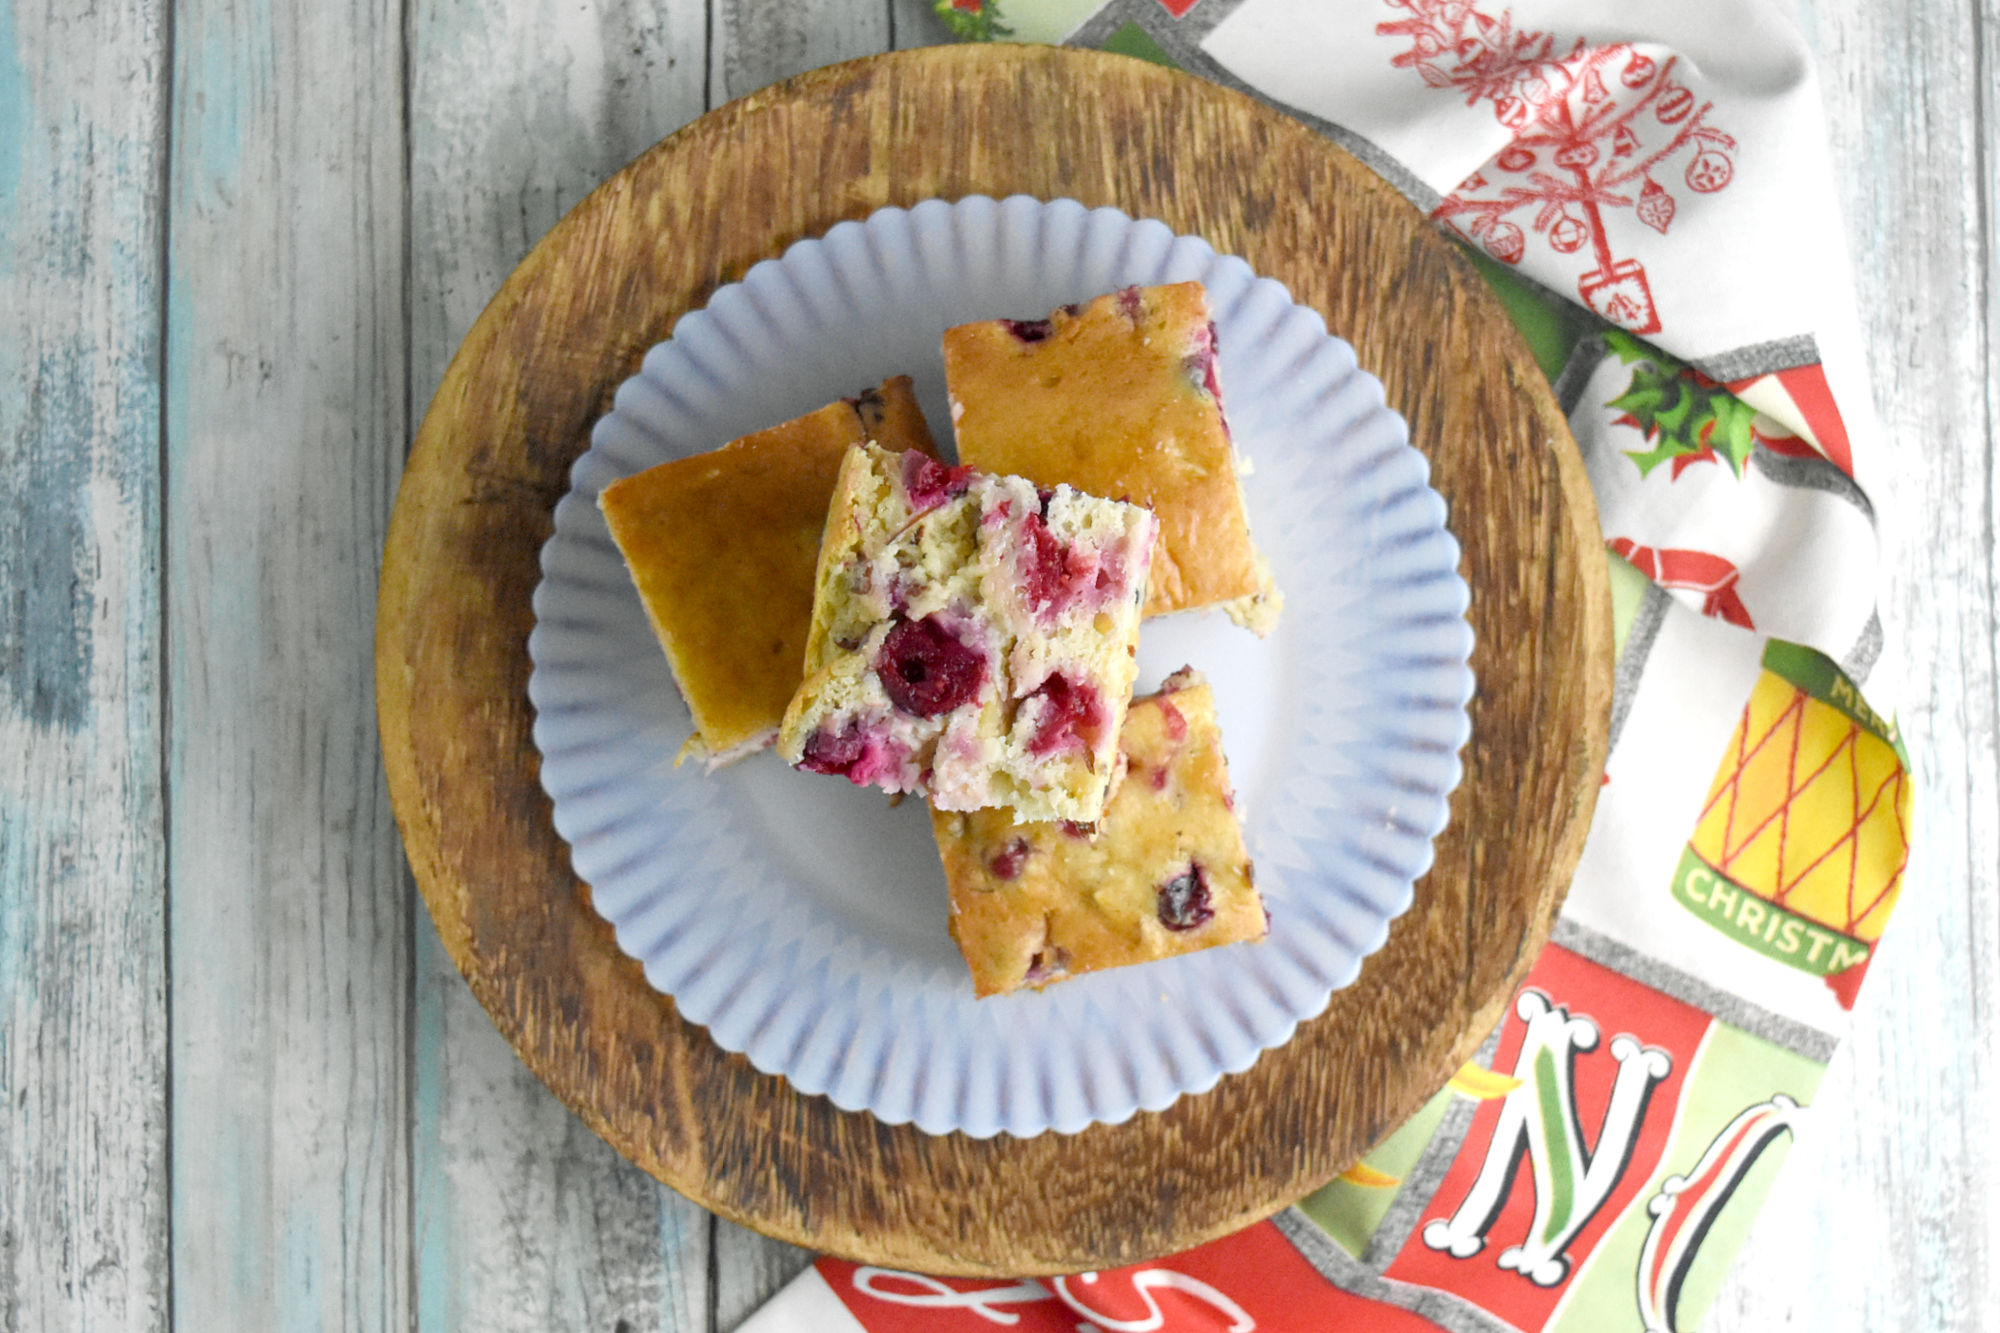 Cranberry Snack Cake is a quick and delicious cake packed with tart cranberry flavor and a sweet vanilla and almond scented cake. It whips up in no time with fresh or frozen cranberries. #CranberryWeek #cranberry #snackcake #cranberrysauce #easyrecipe